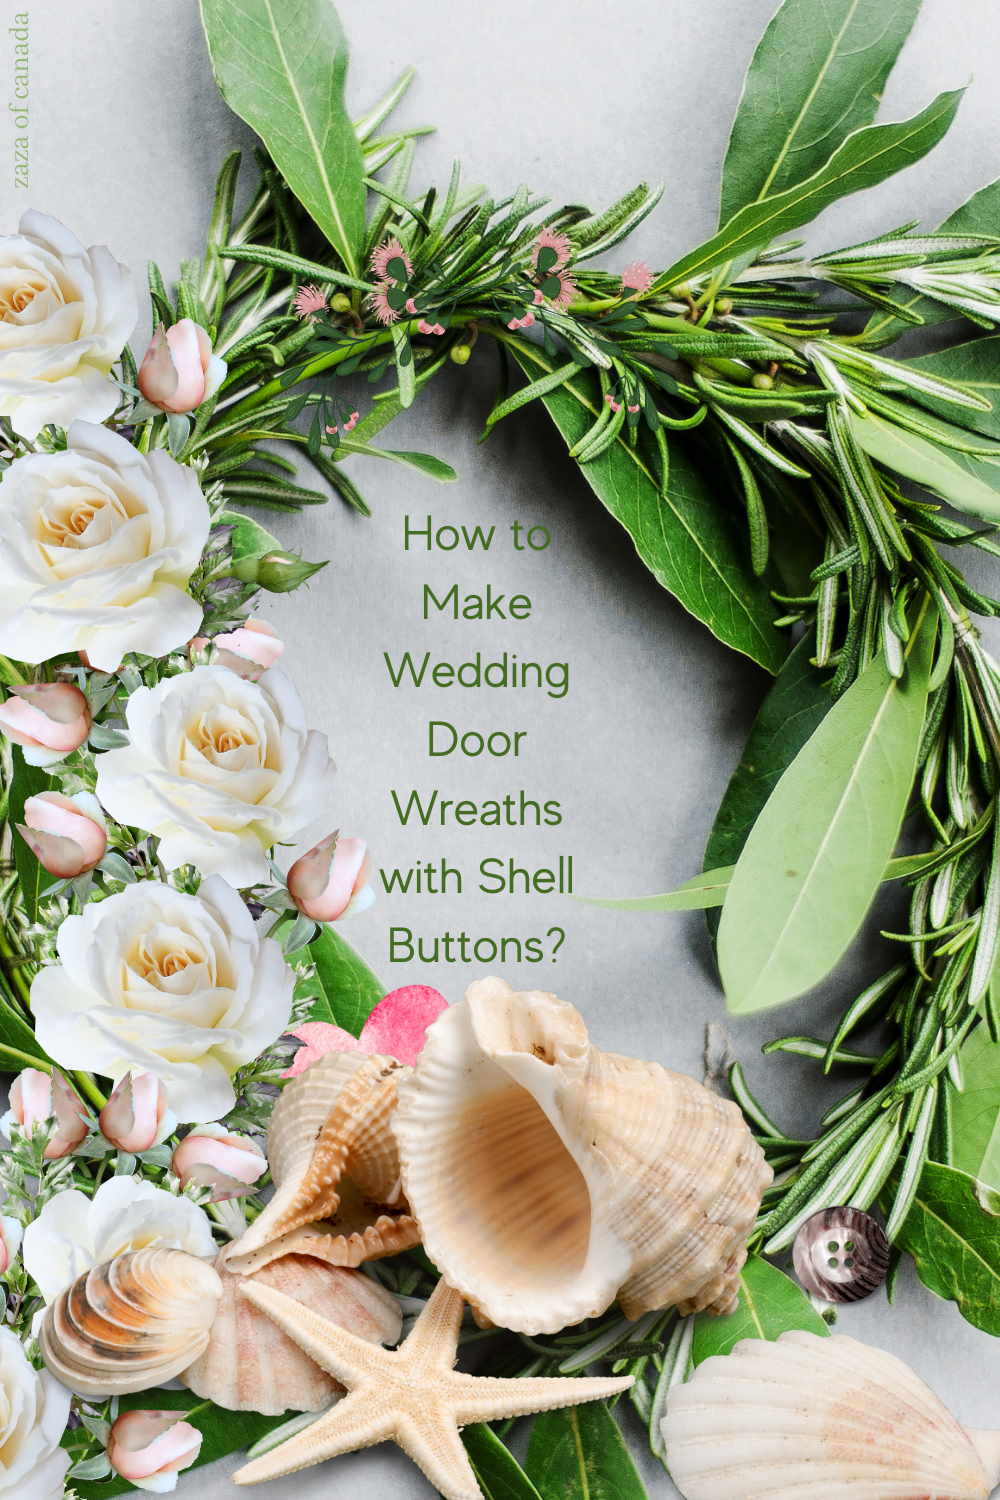 How to Make Wedding Door Wreaths with Shell Buttons